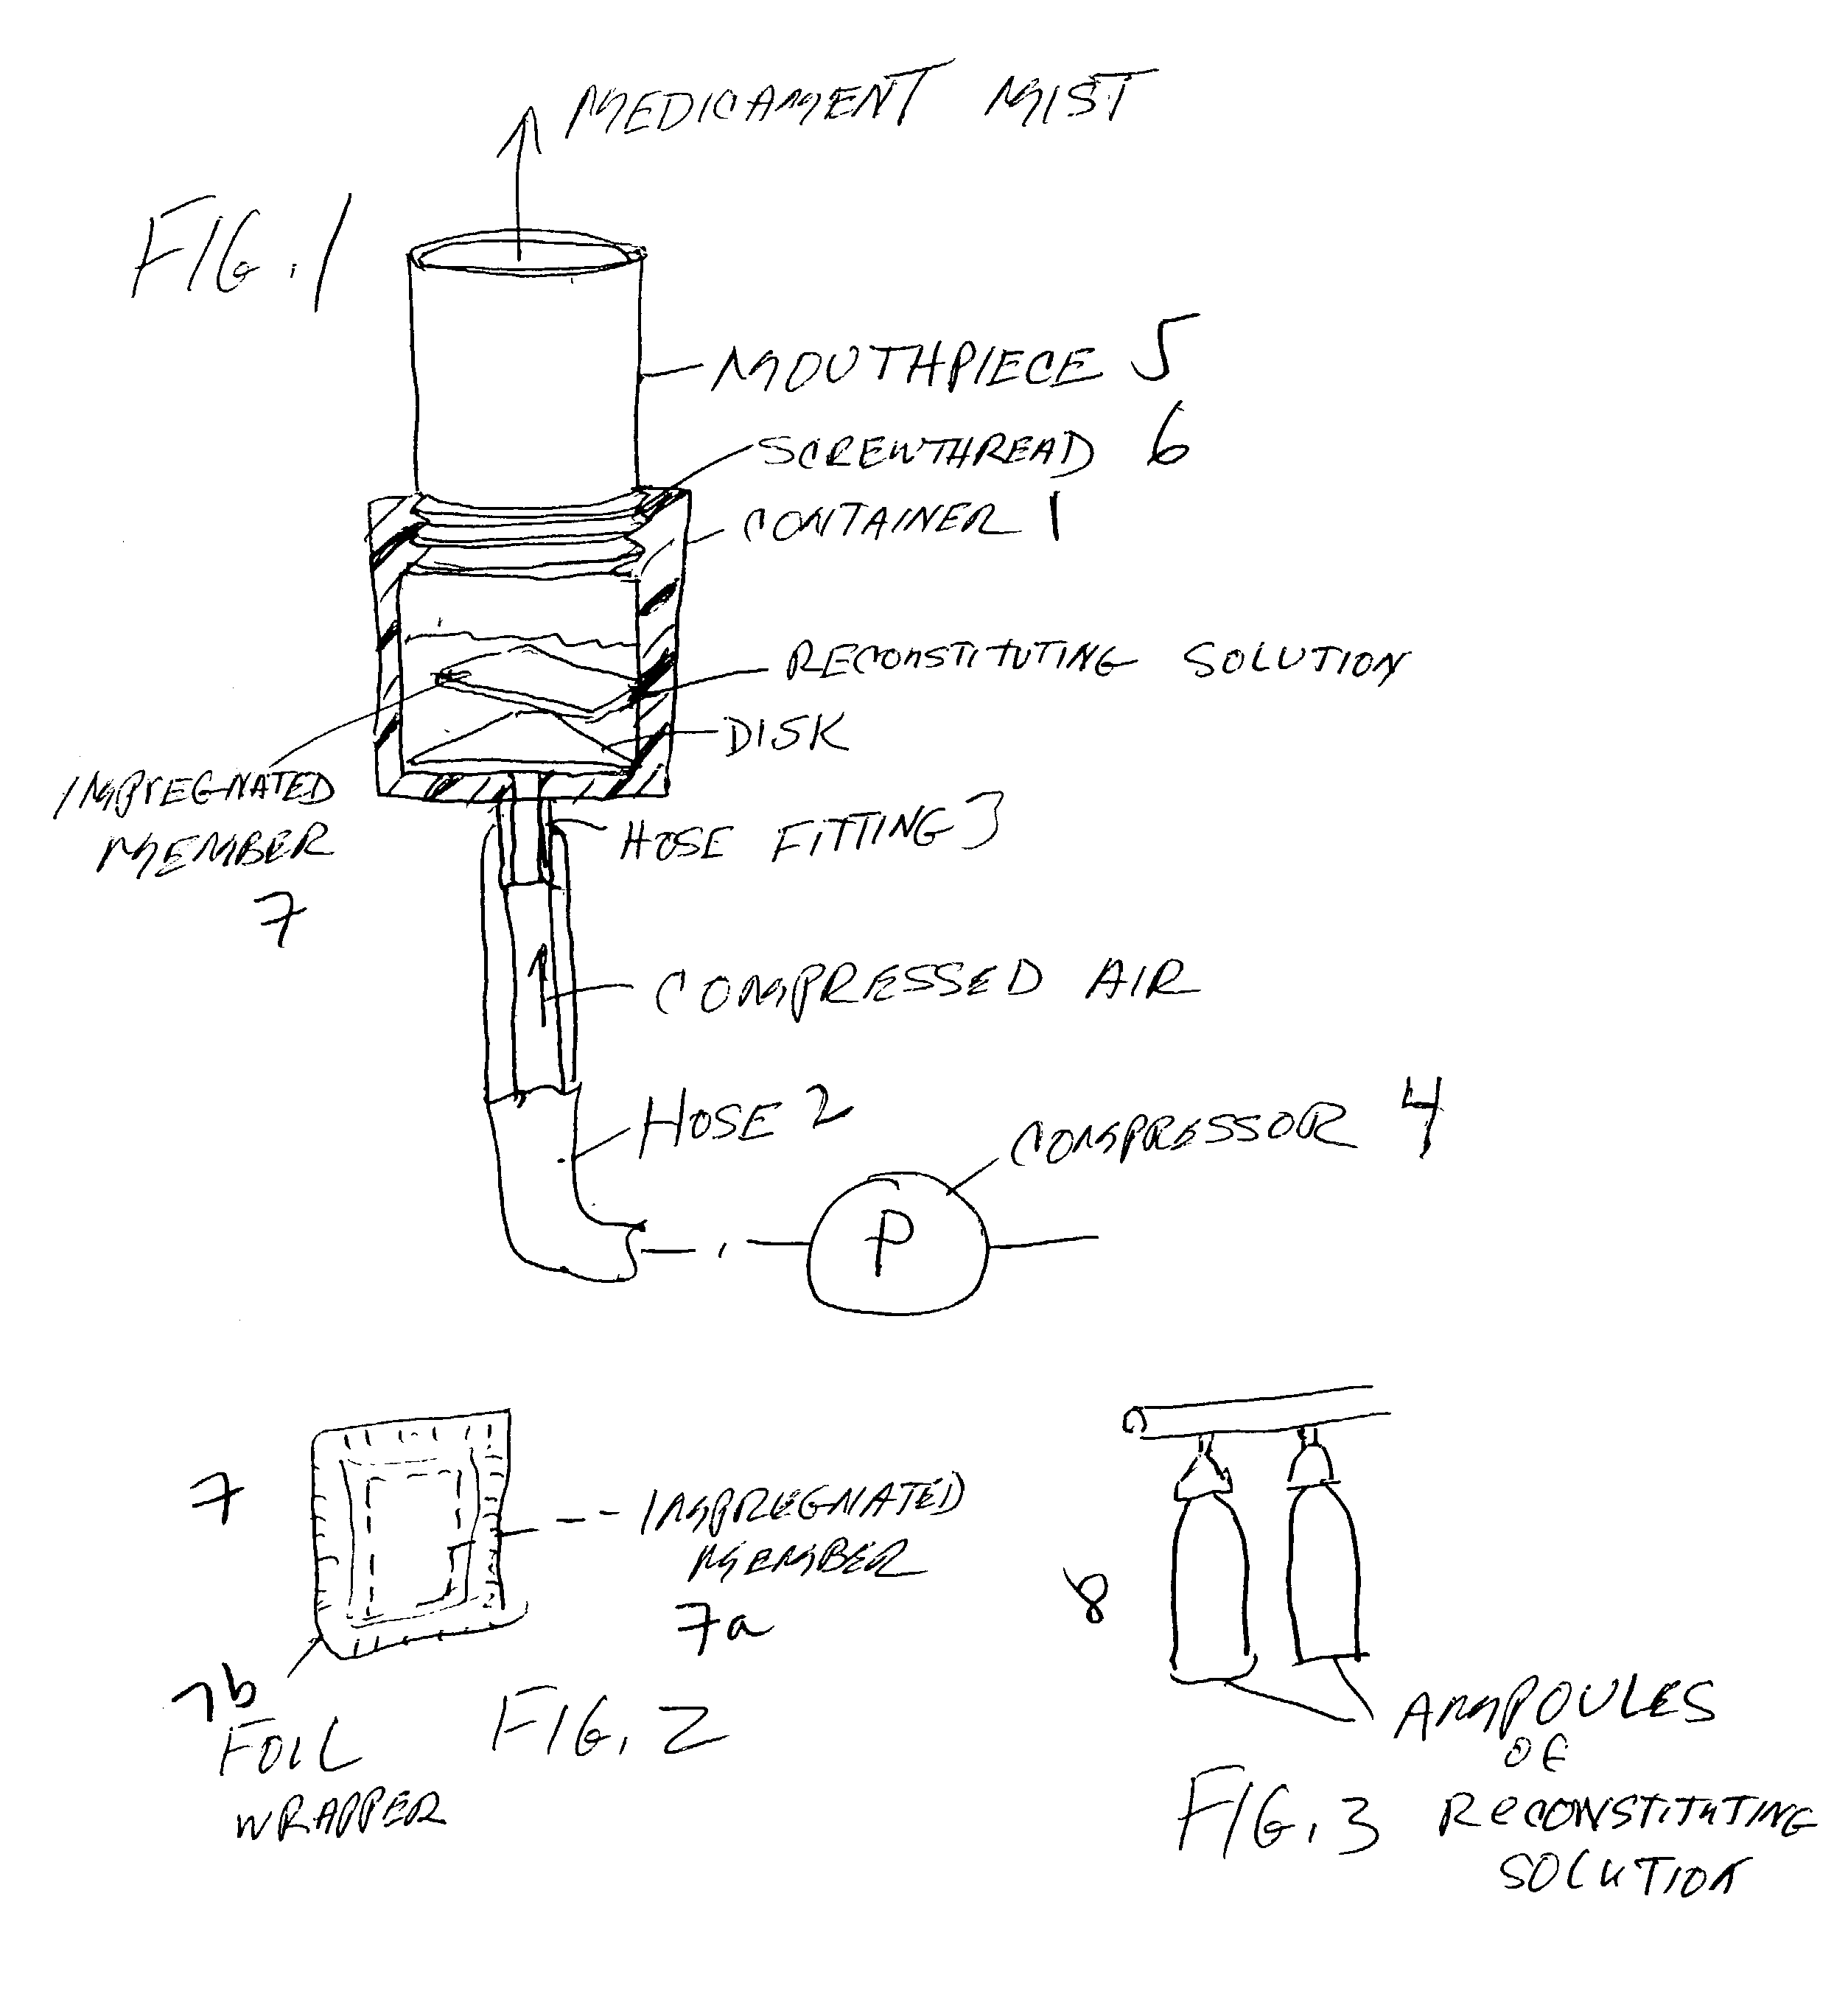 Pharmaceutical delivery system for oral inhalation through nebulization consisting of inert substrate impregnated with substance (S) to be solubilized or suspended prior to use